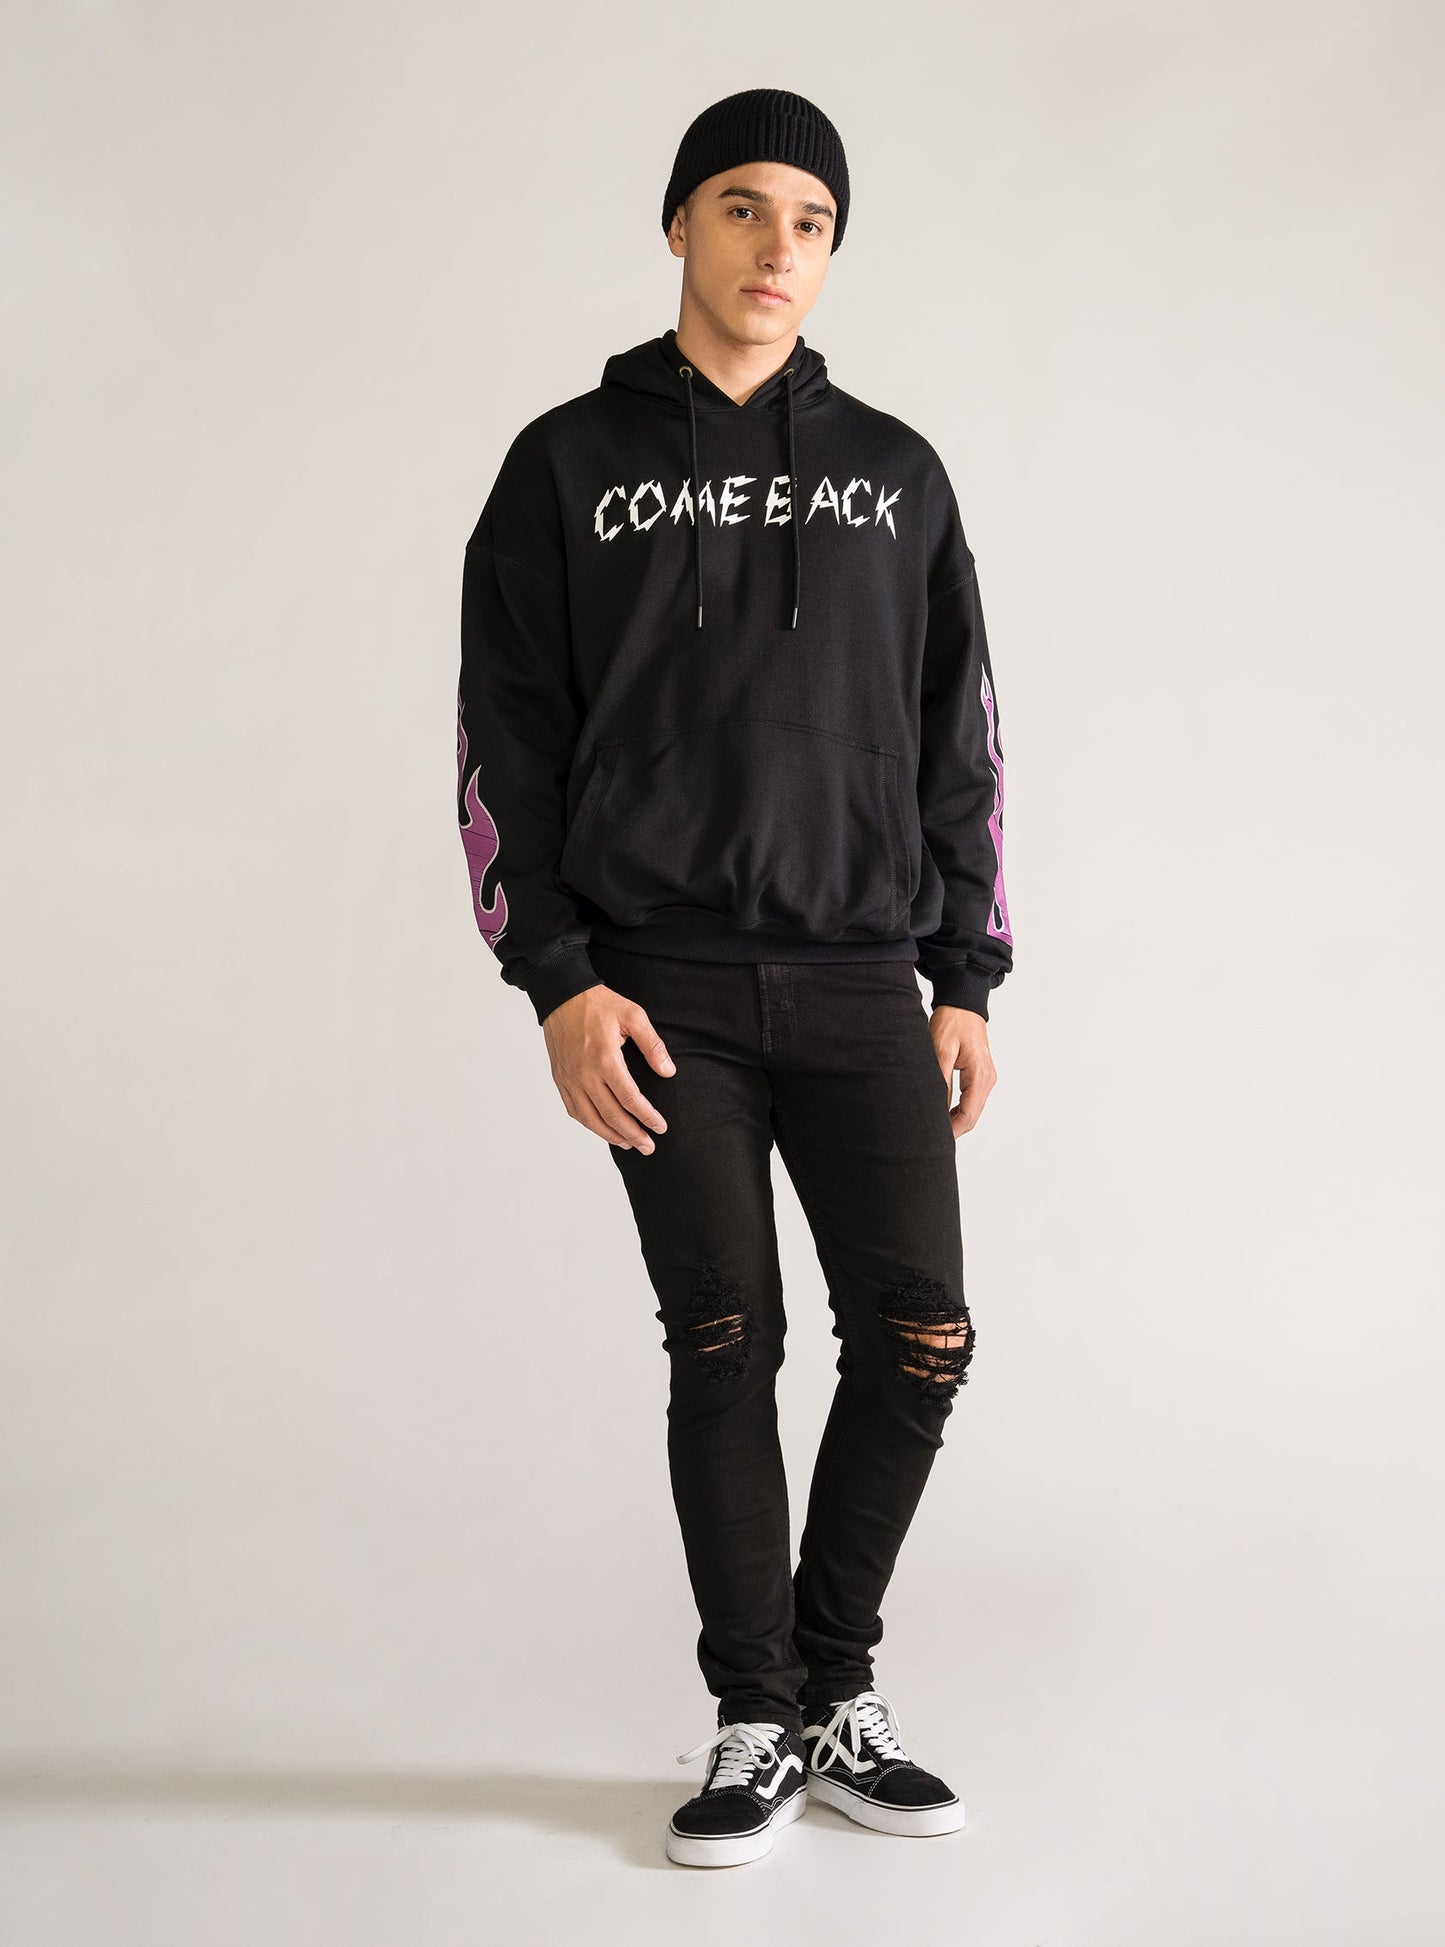 Come Back Hoodie, Negro